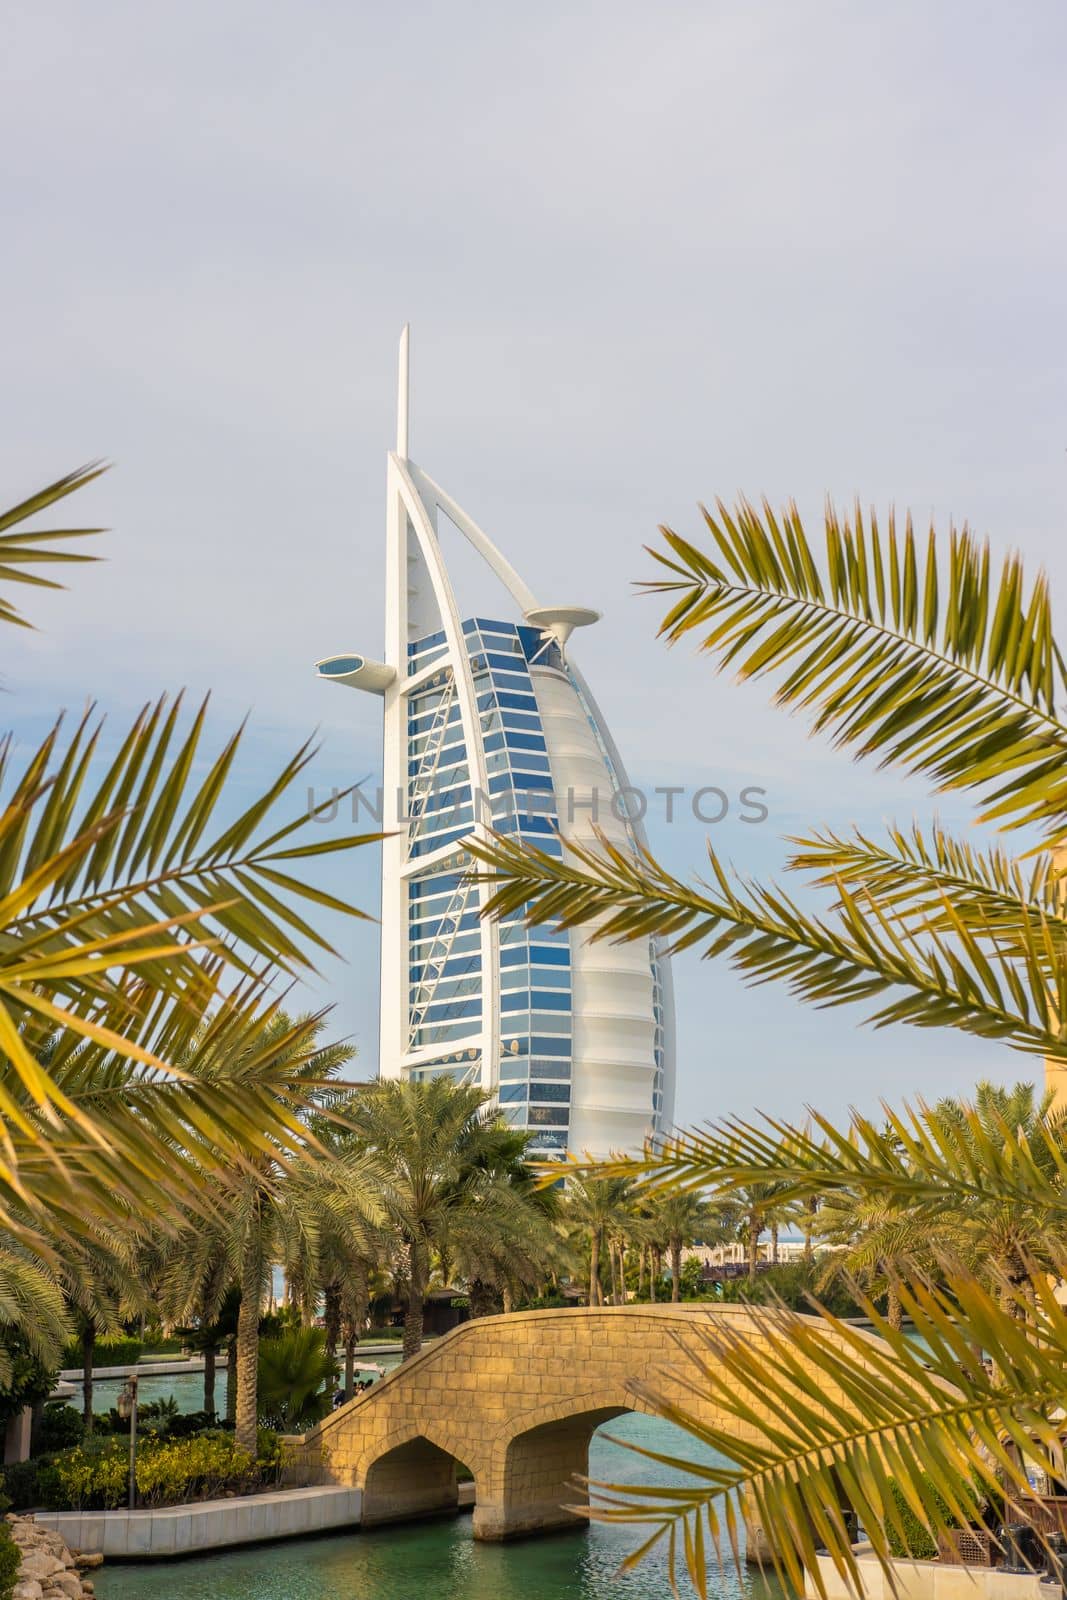 Burj al arab hotel in Dubai during the day and amid palm trees.